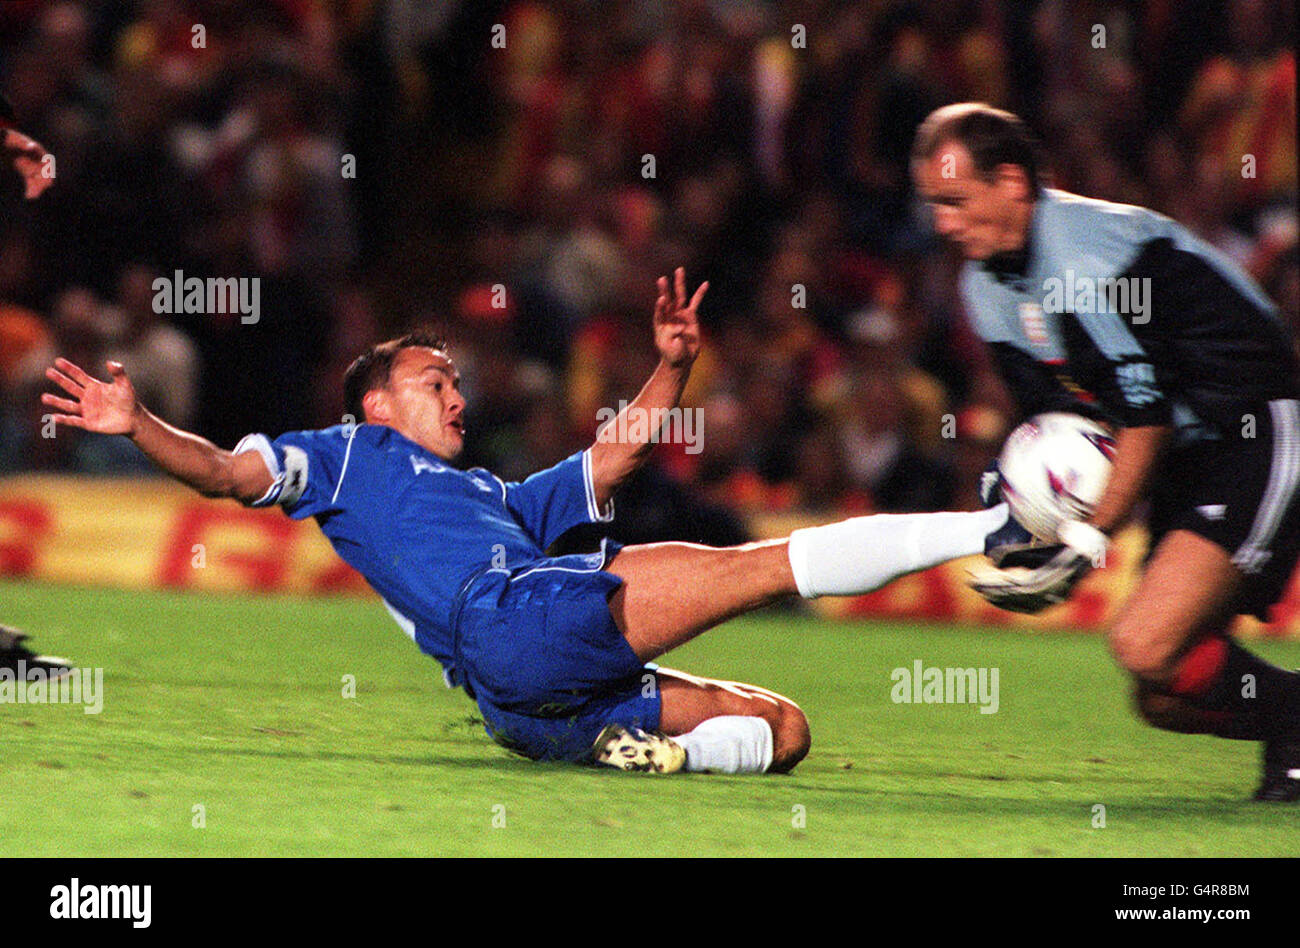 Galatasaray goaleeper Claudio Taffarel scoops the ball from the foot of Chelsea captain Dennis Wise, during the UEFA Champions League football match at Stamford Bridge. Stock Photo